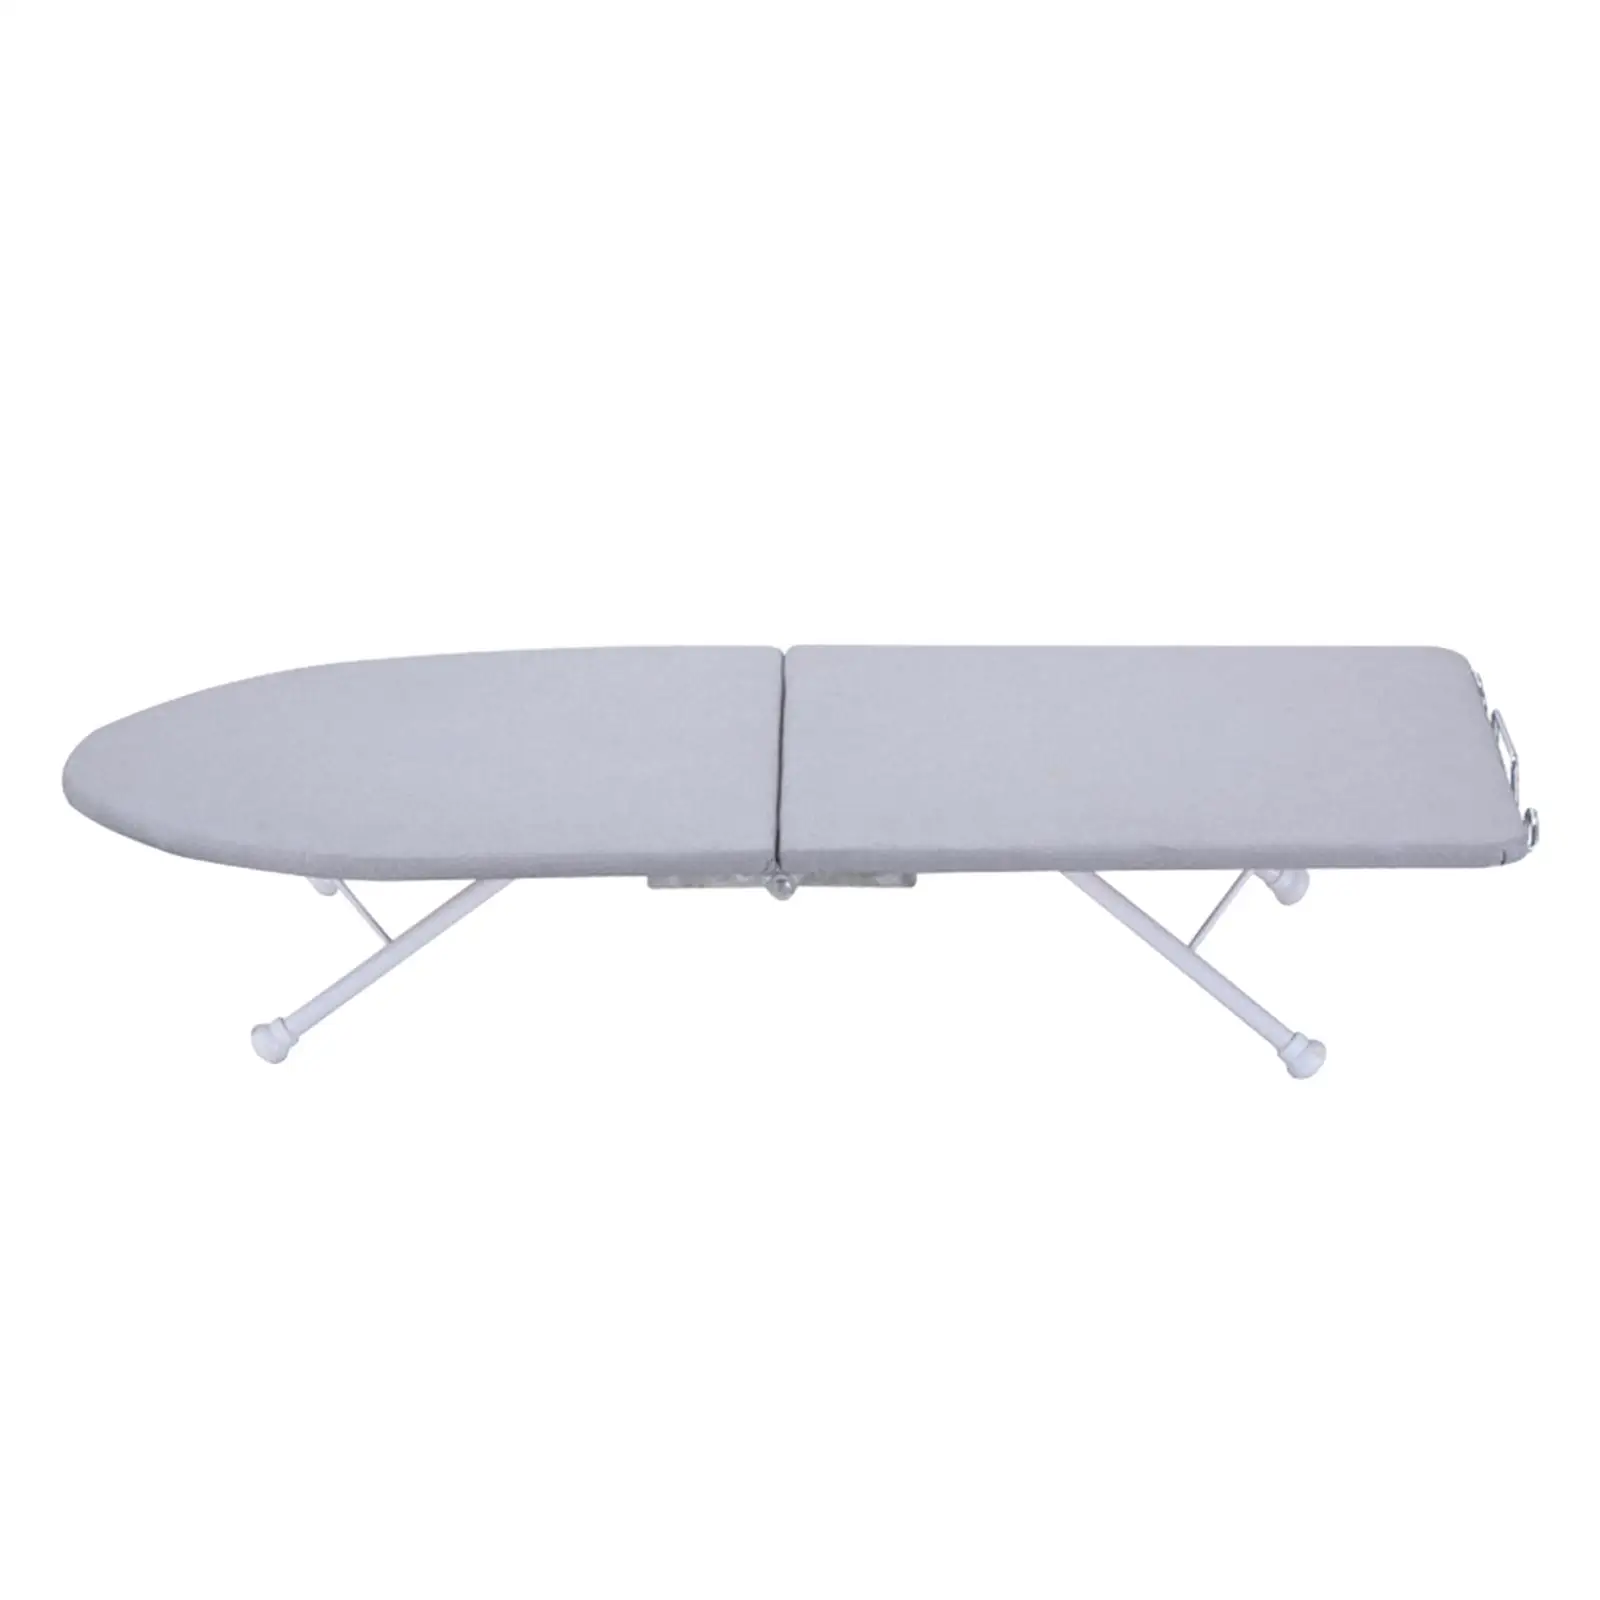 Tabletop Ironing Board Heat Resistant Cover Compact Foldable Ironing Board